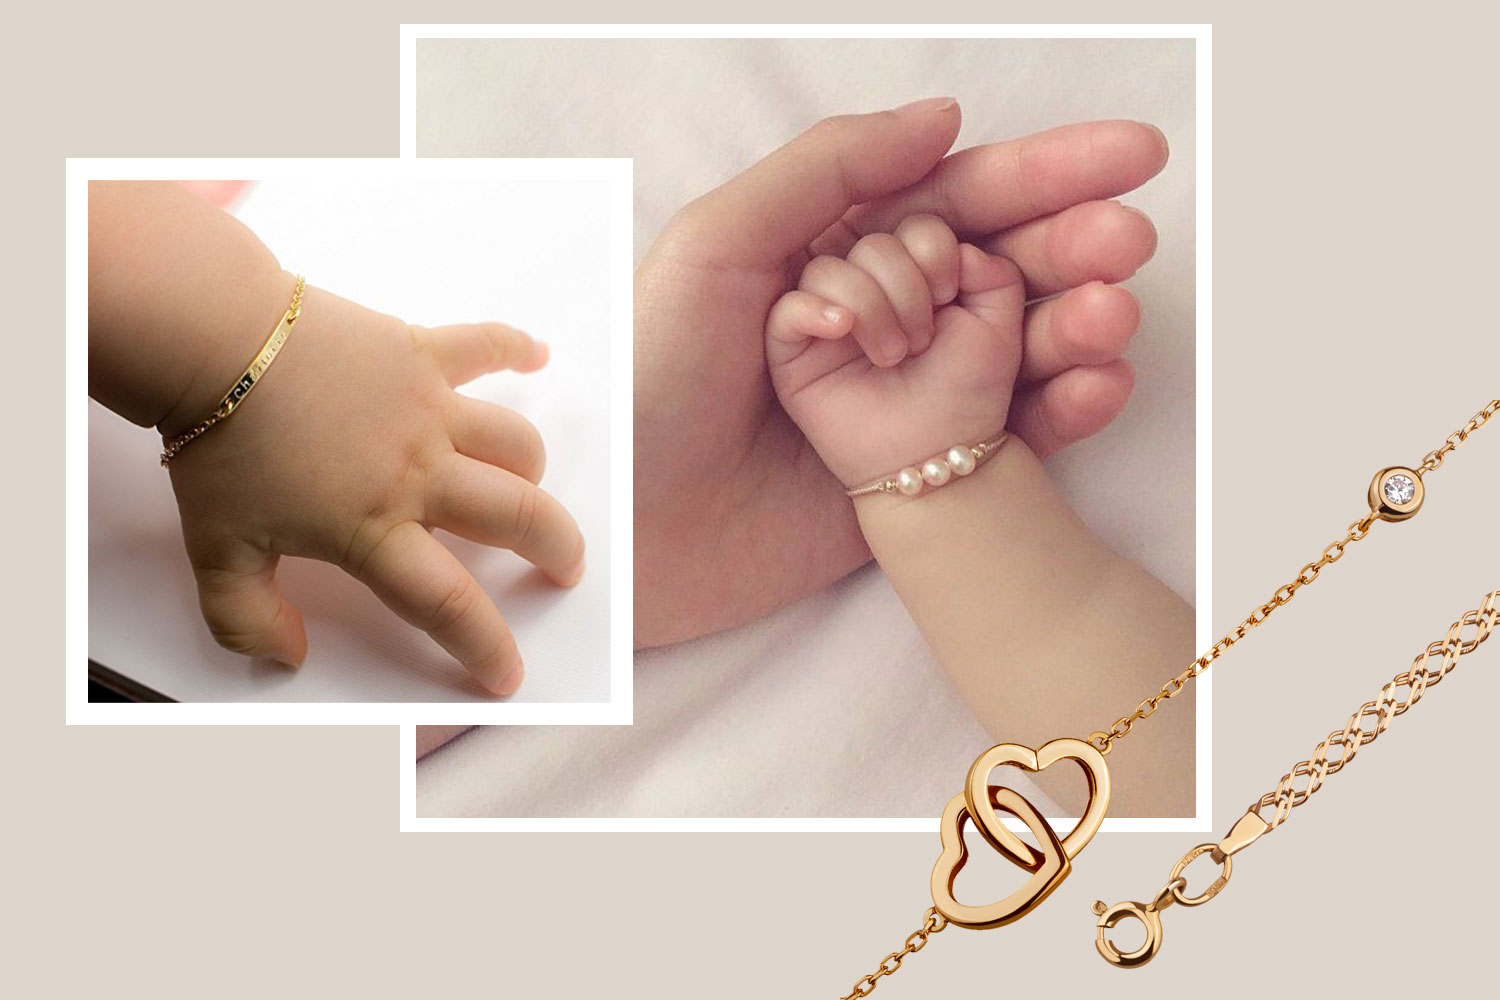 Why it is important to give children gold jewellery